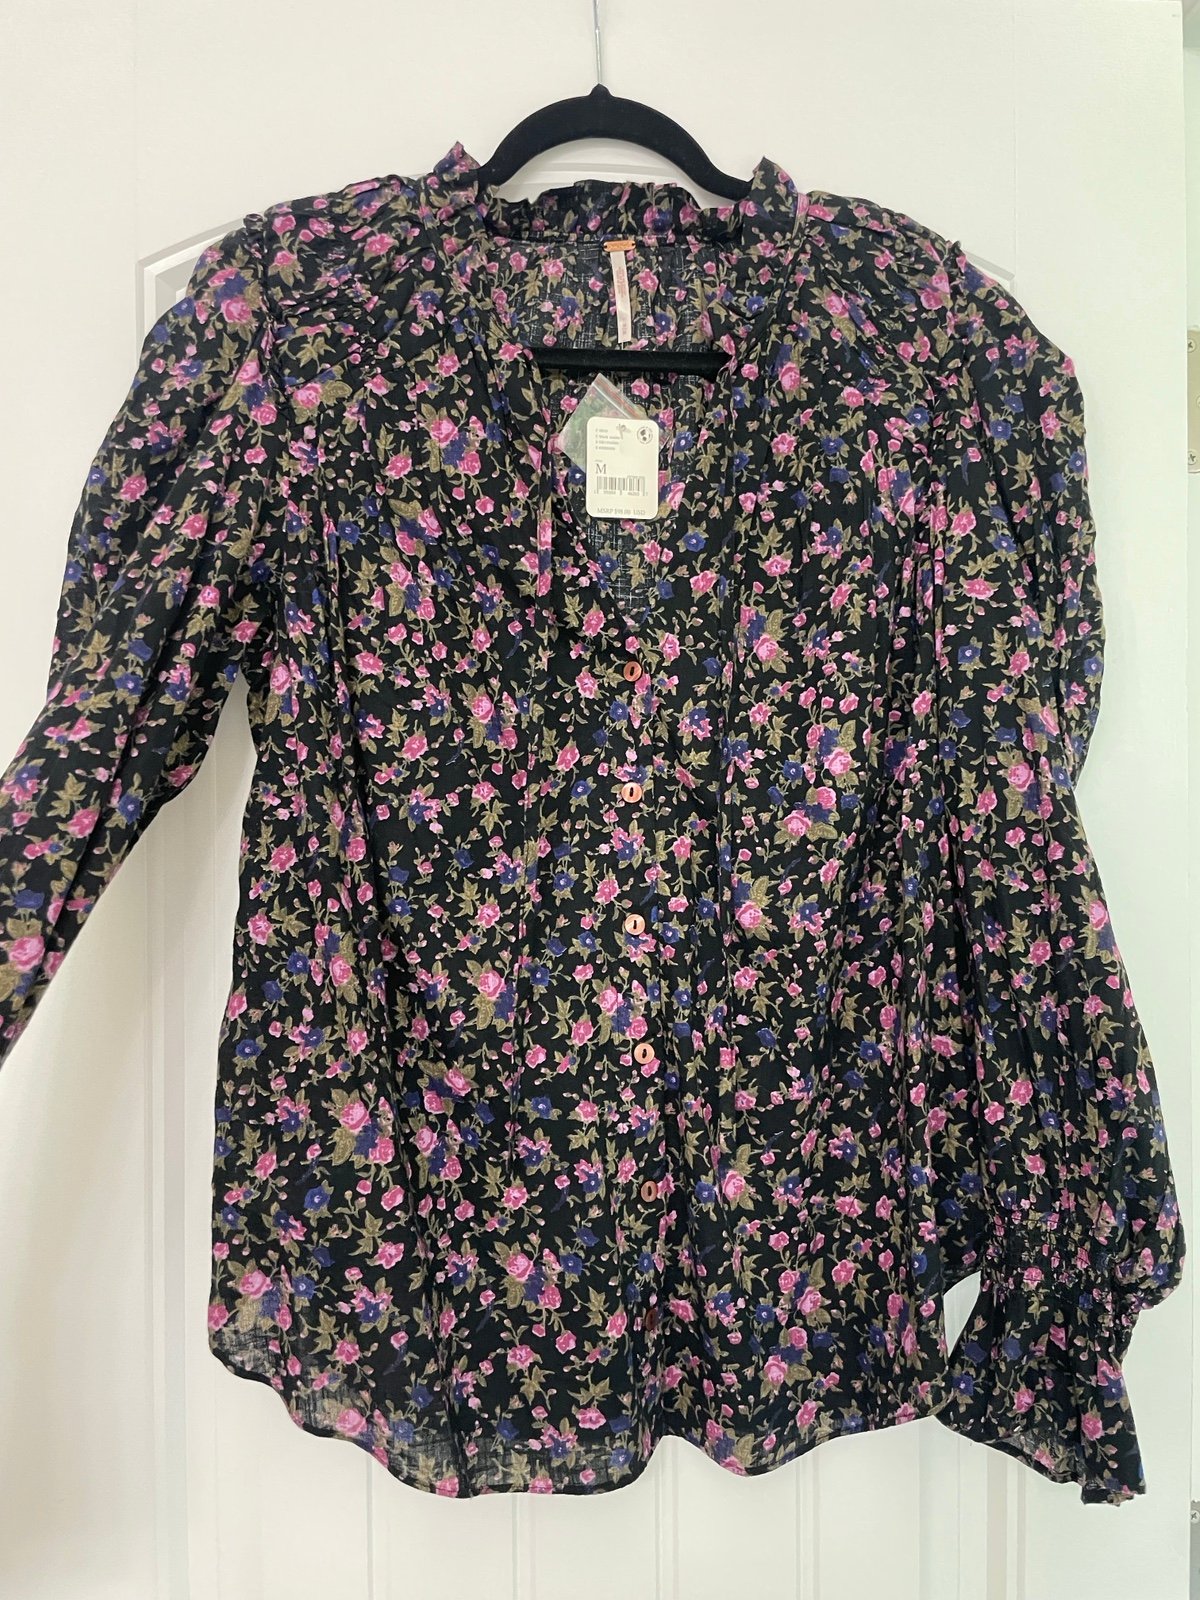 Authentic Free People button up blouse JDTLV5a8k for sale